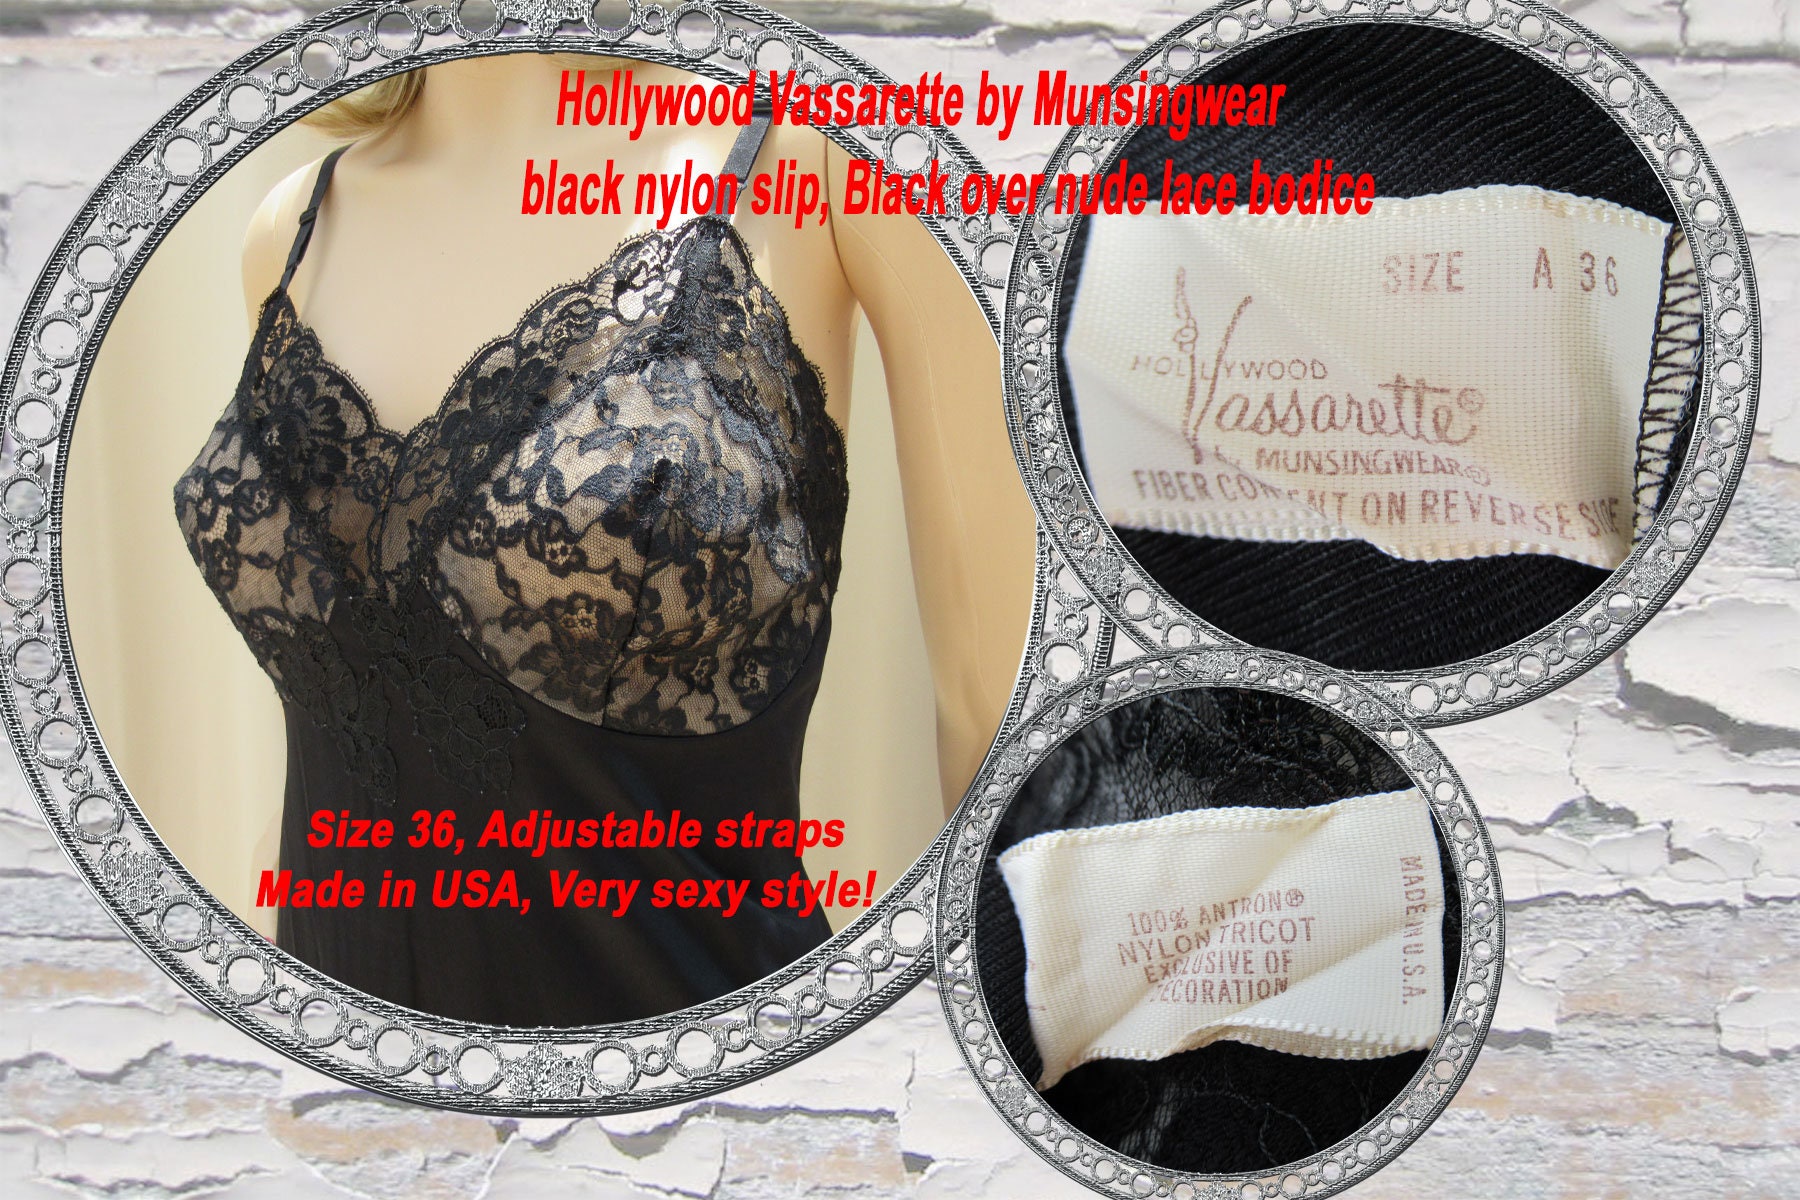 Hollywood Vassarette by Munsingwear Black Nylon Slip, Black Over Nude Lace  Bodice, Sz 36, Adjustable Straps, Made in USA, Very Sexy Style 